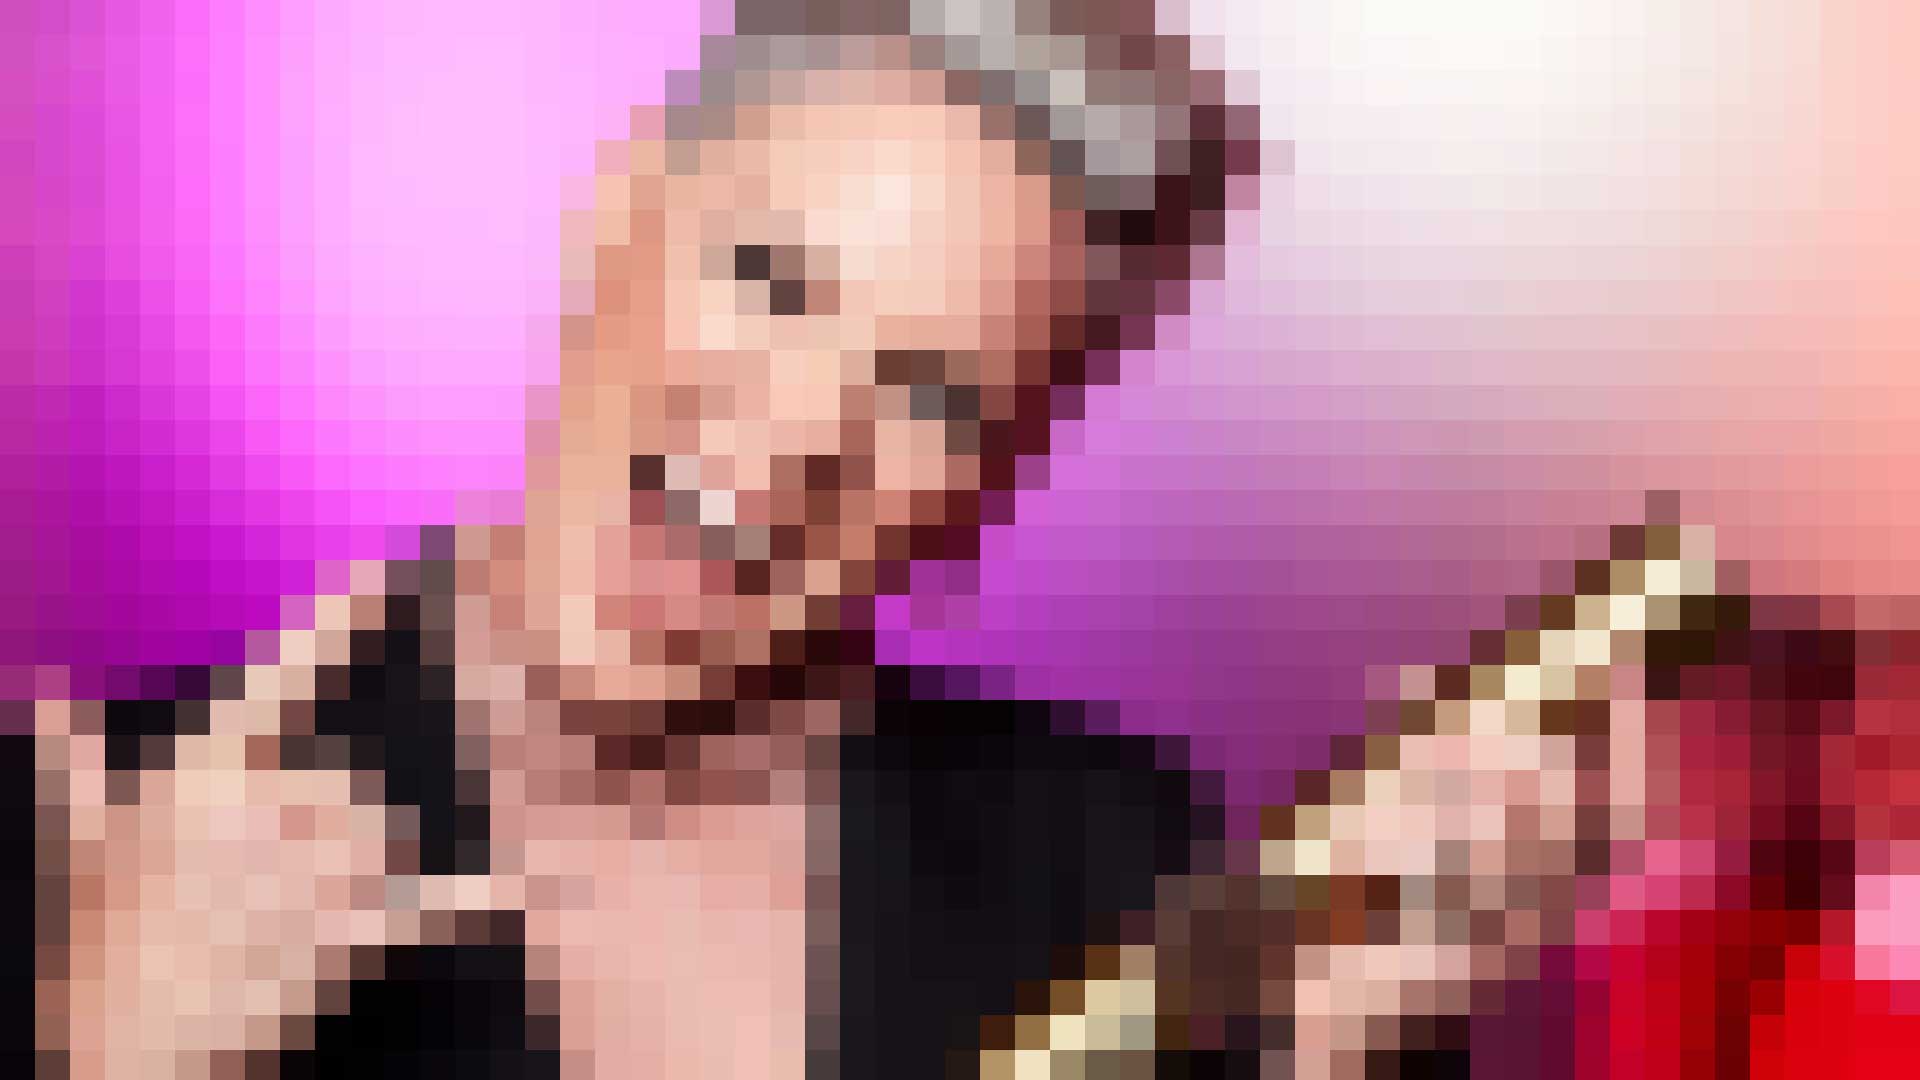 A blurred image of a singer